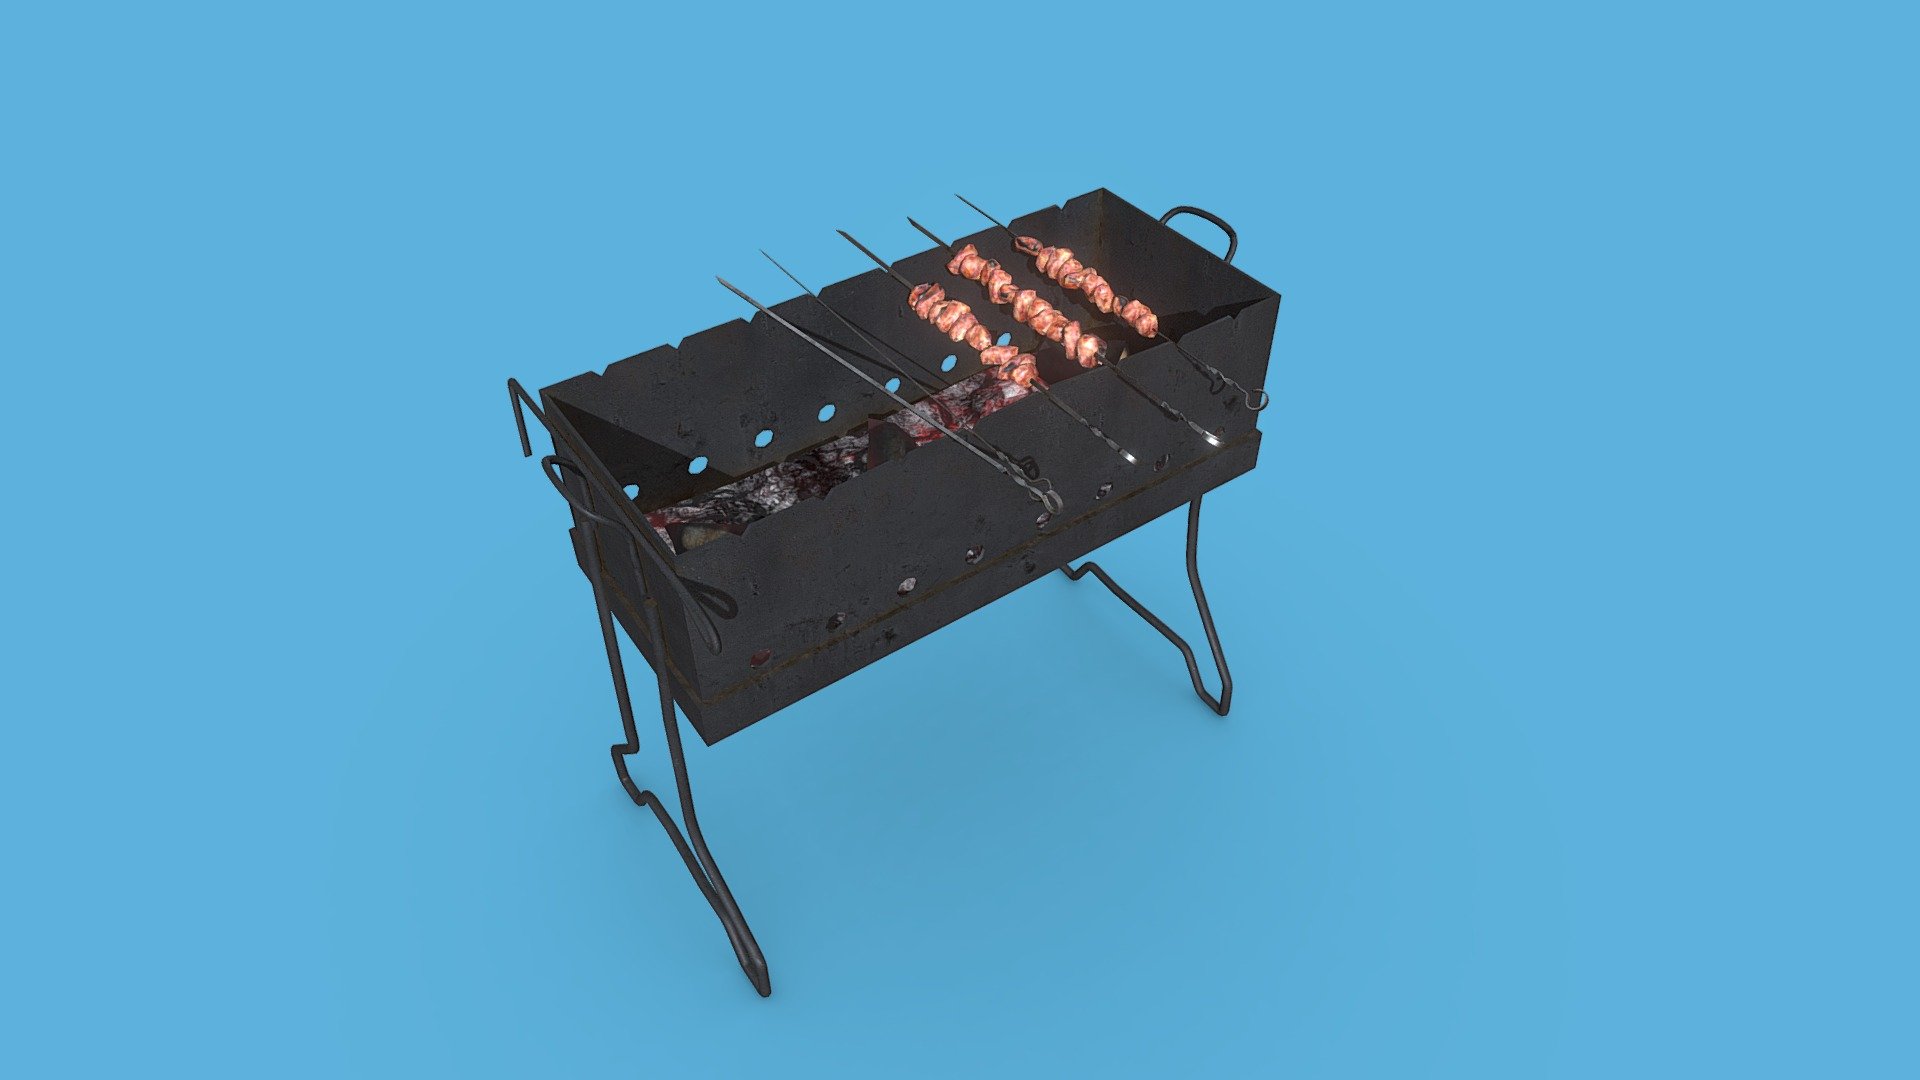 Old BBQ set




1 mesh included.

Model is low poly.

Model is Game-Ready/VR ready.

Model is UV mapped and unwrapped (non overlapping)

Assets are fully textured, 2048x2048, 1024x1024 .png’s. PBR

File Format: .FBX

Additional zip file contains all the files 3d model